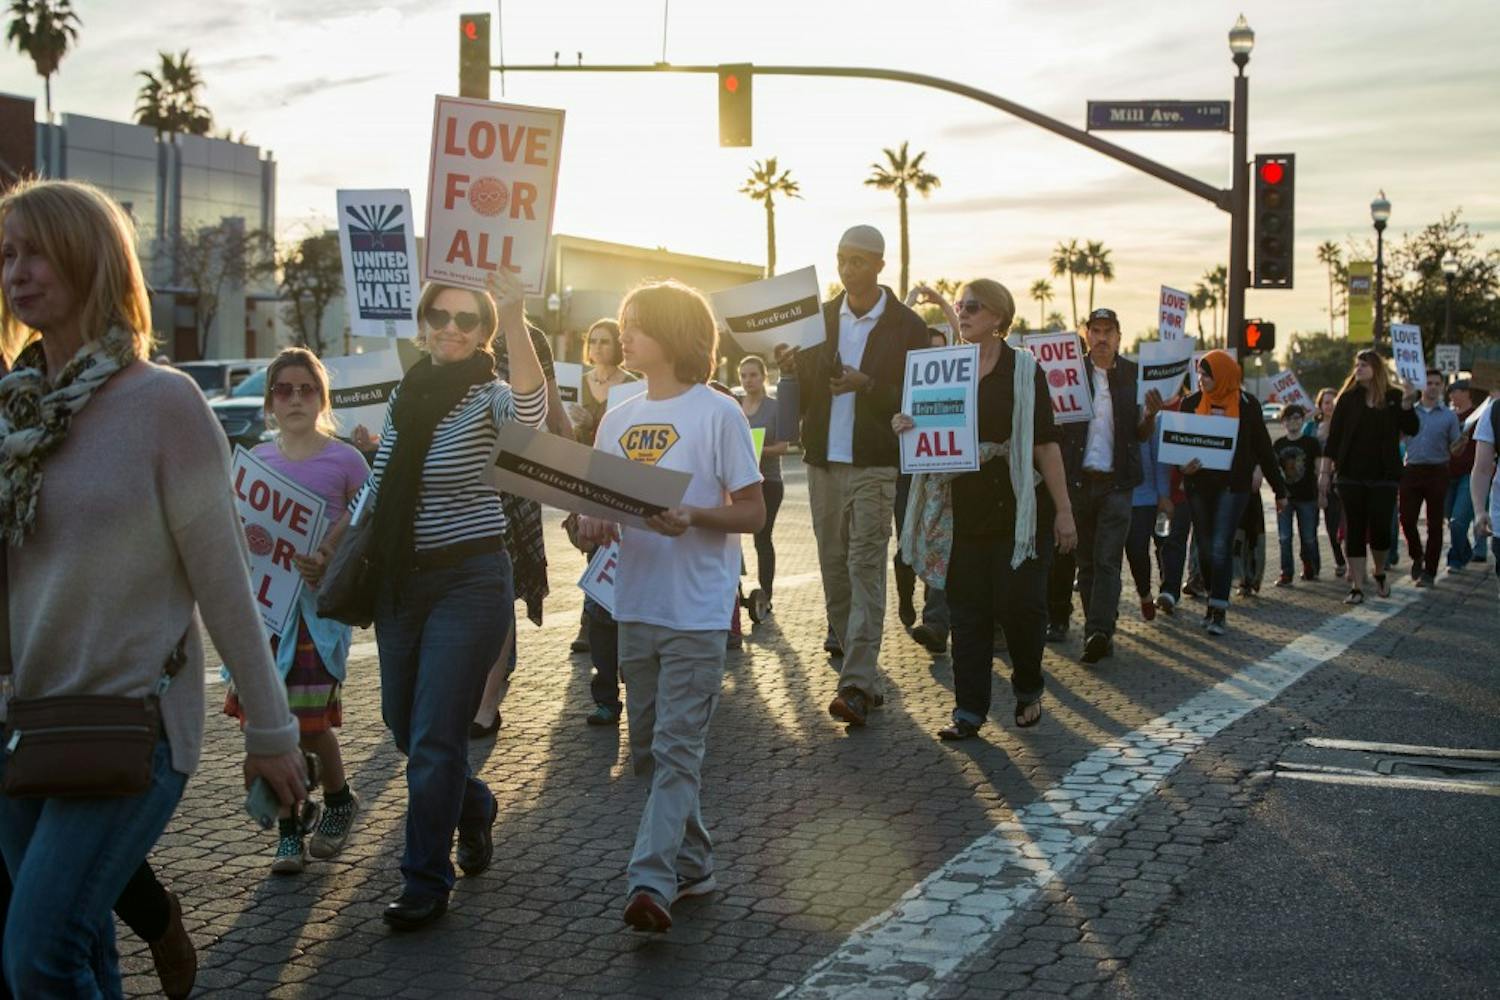 Silent march participants march along University Dr. in downtown Tempe on Friday, Feb. 3, 2017.